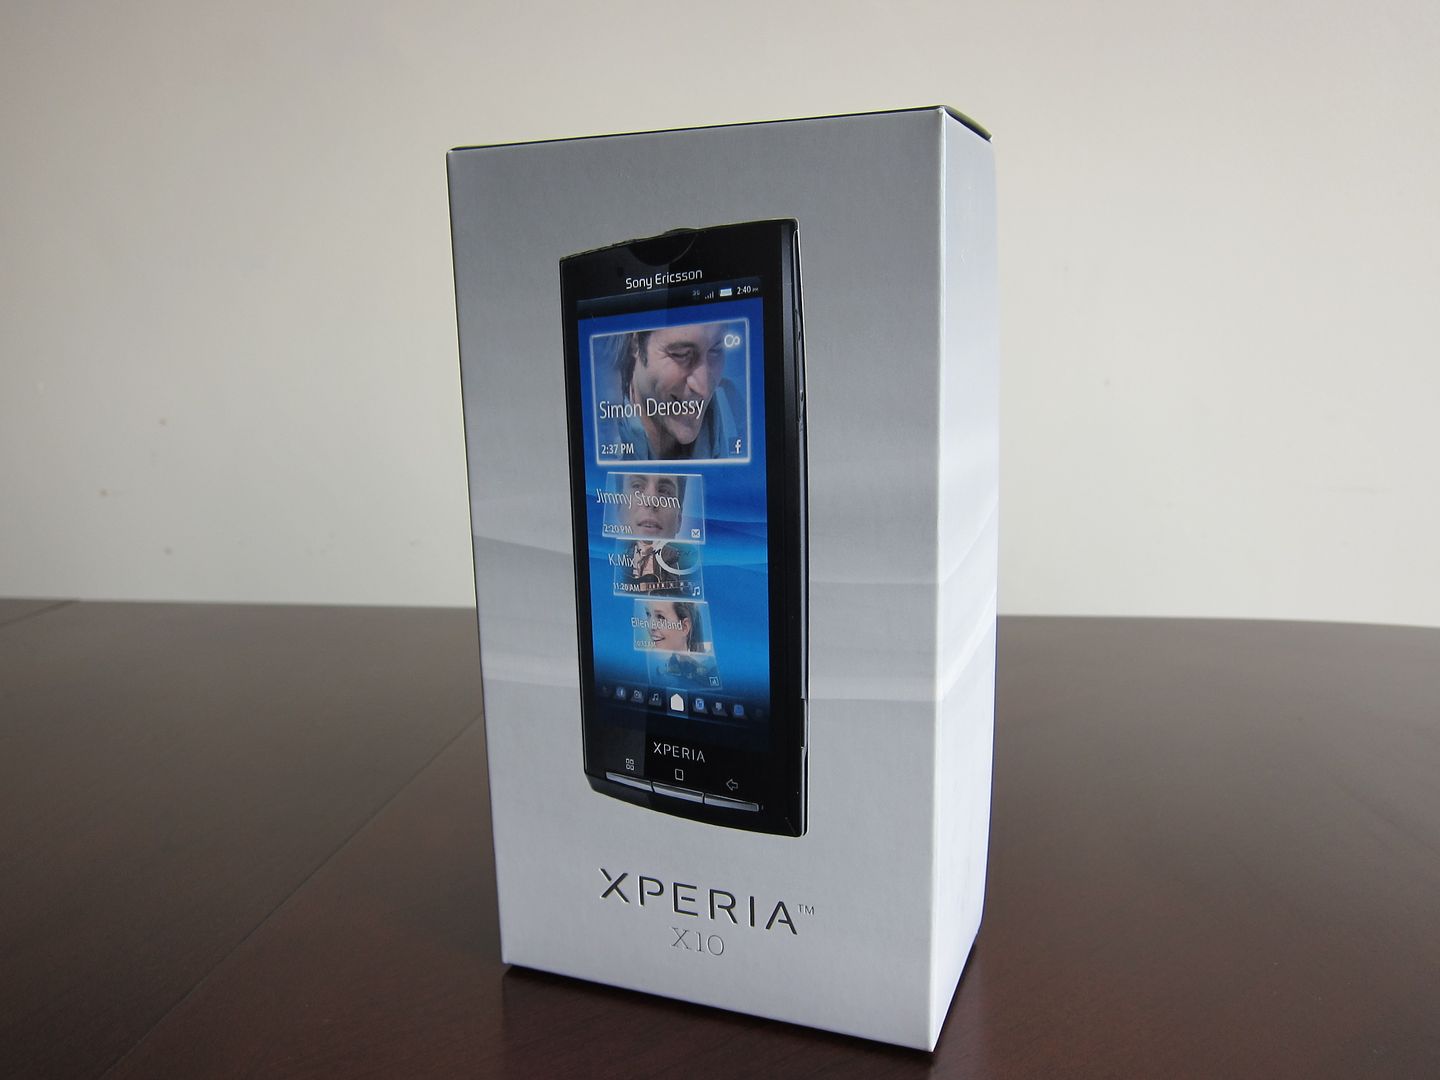 Unboxing our Xperia X10